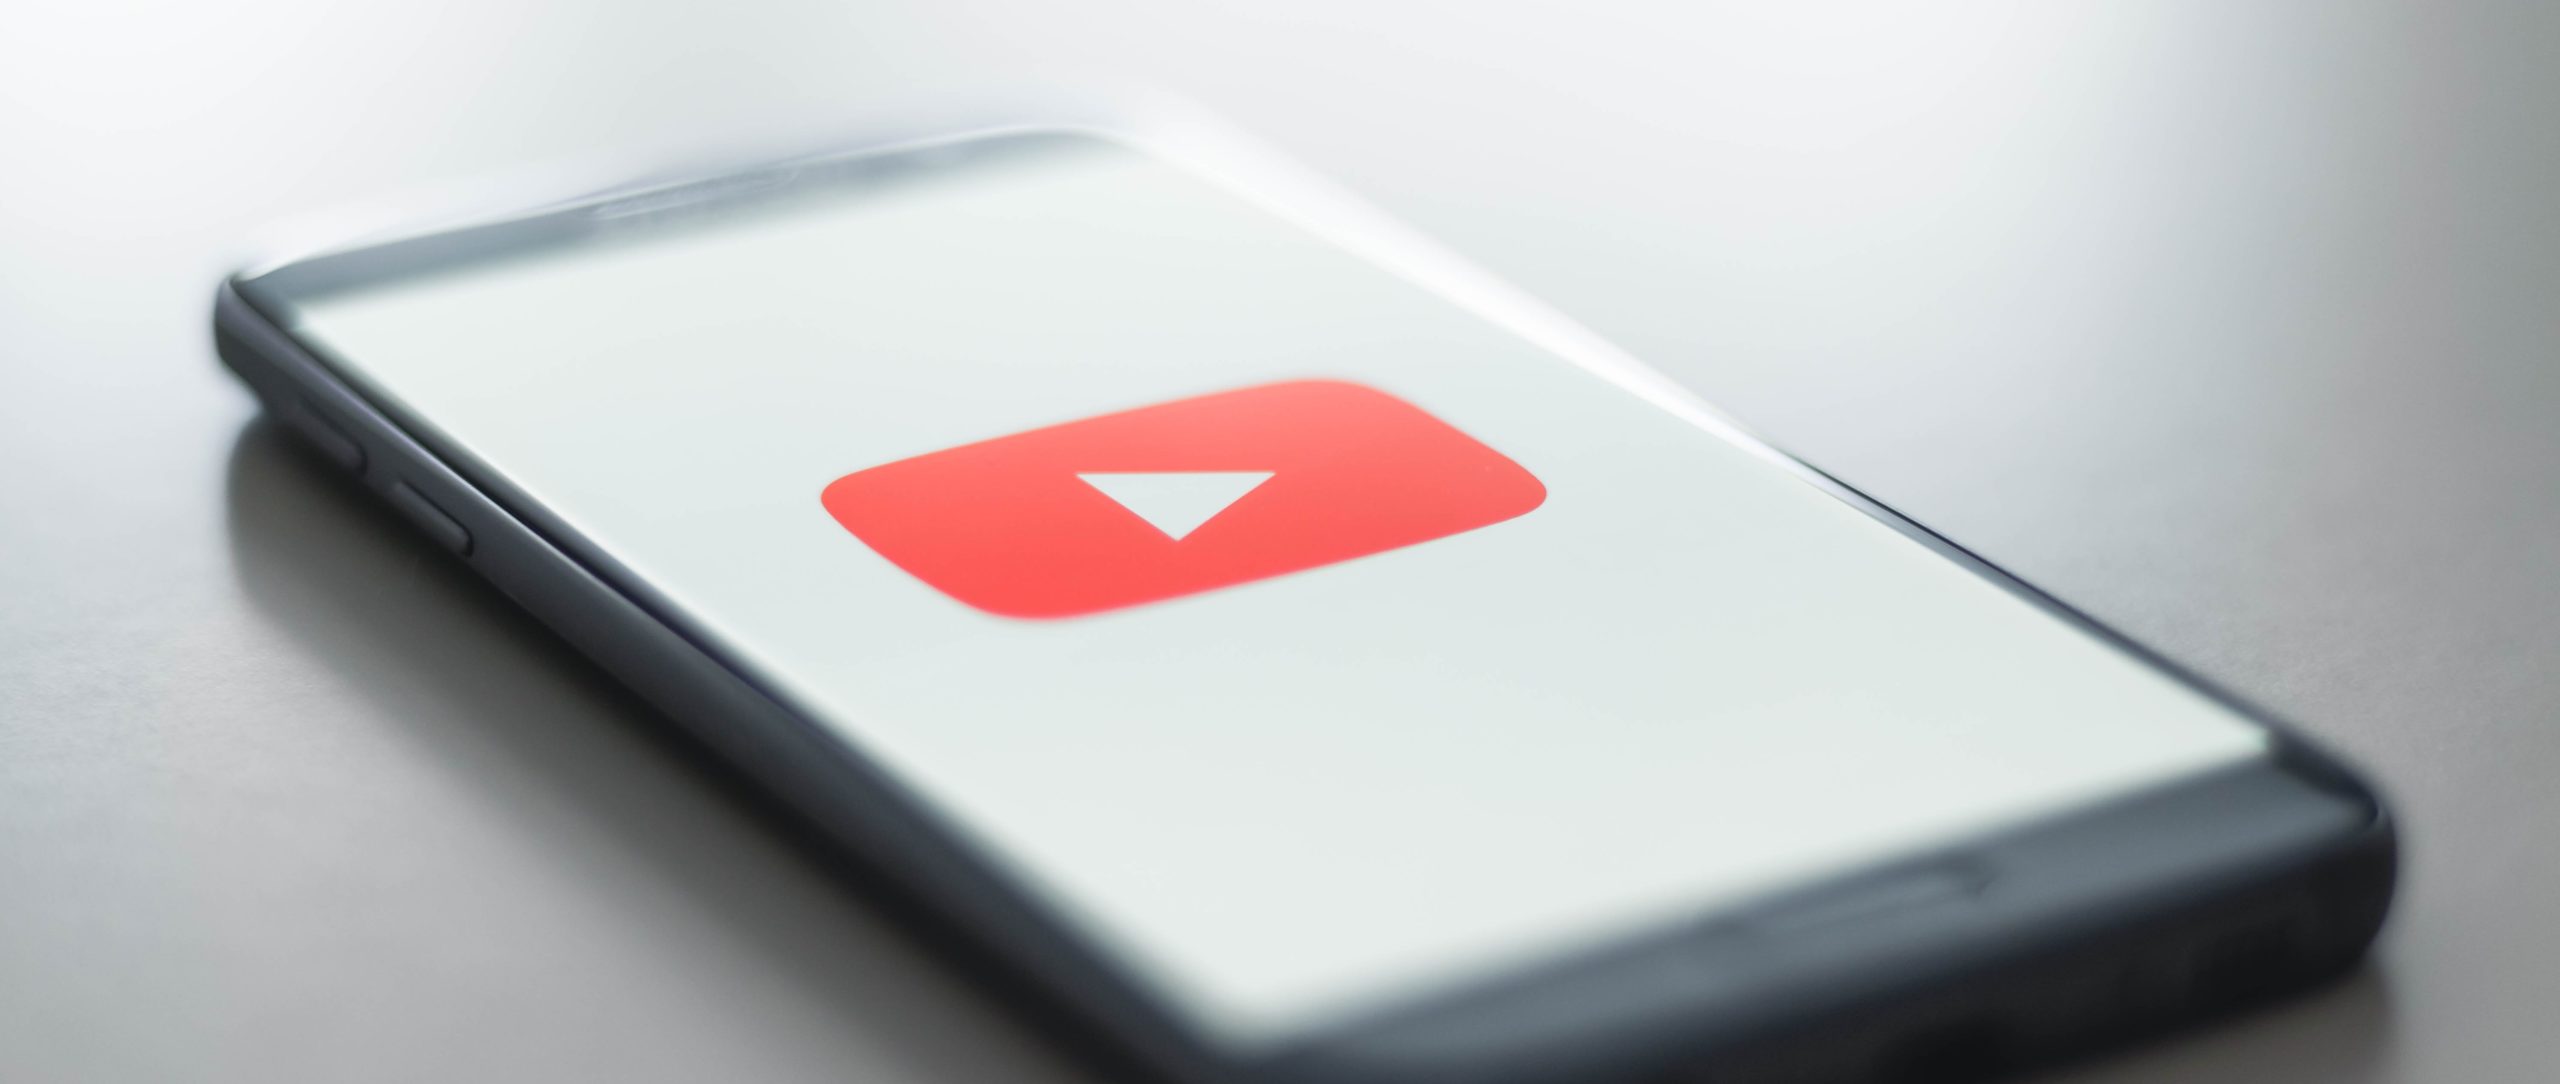 What is Youtube Premium and how much does it cost?